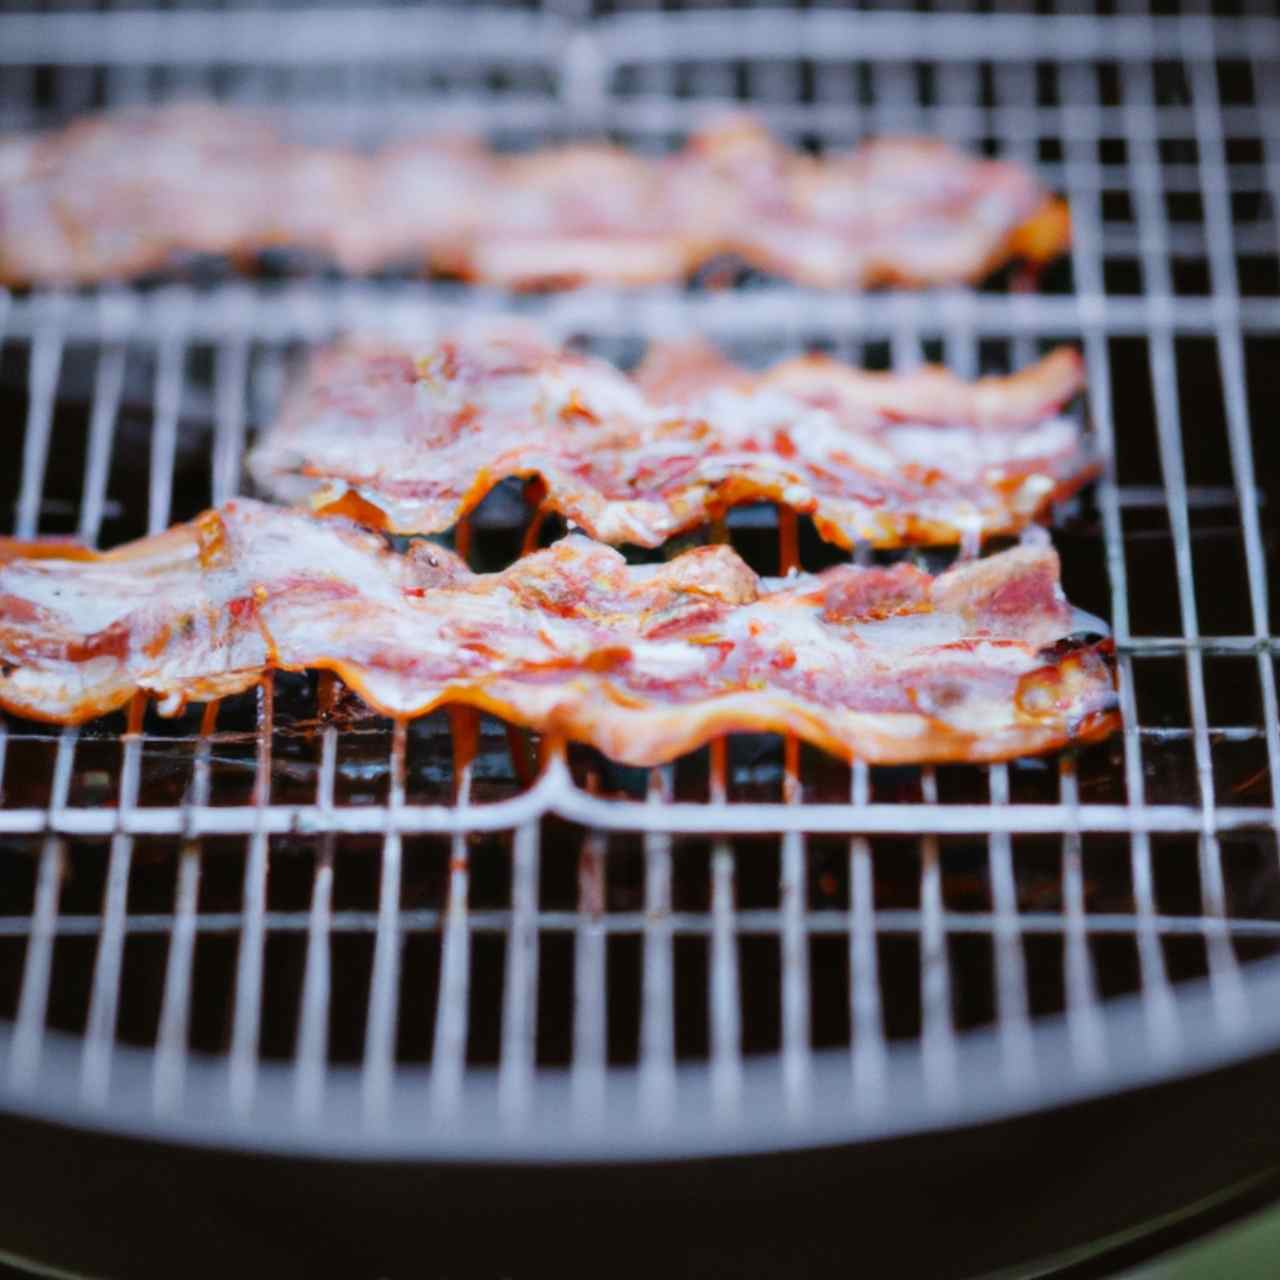 Grilled vs Fried Bacon